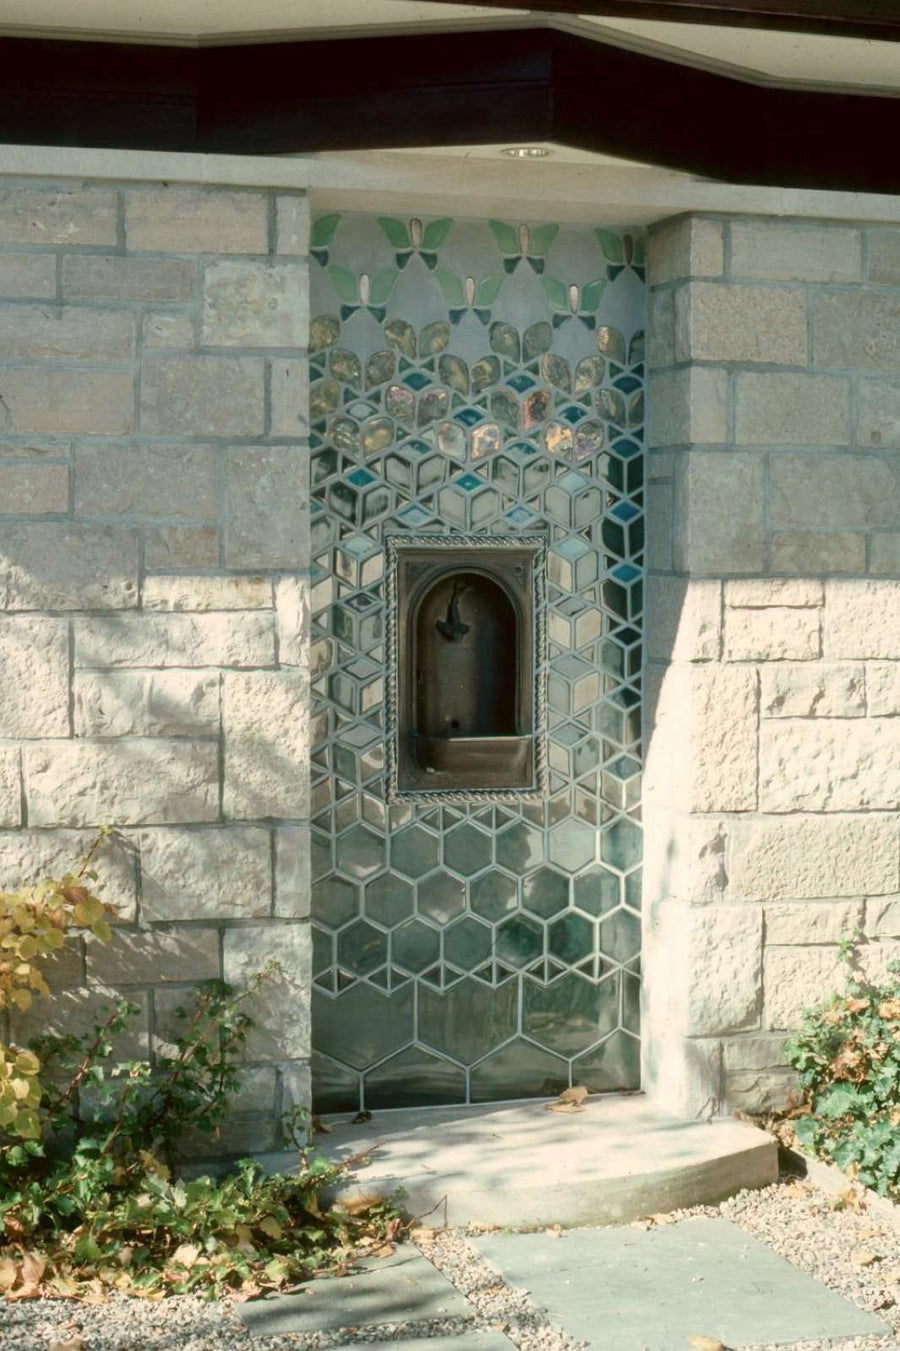 In the center of the design is a metal alcove where water can come out to fill water bottles. 